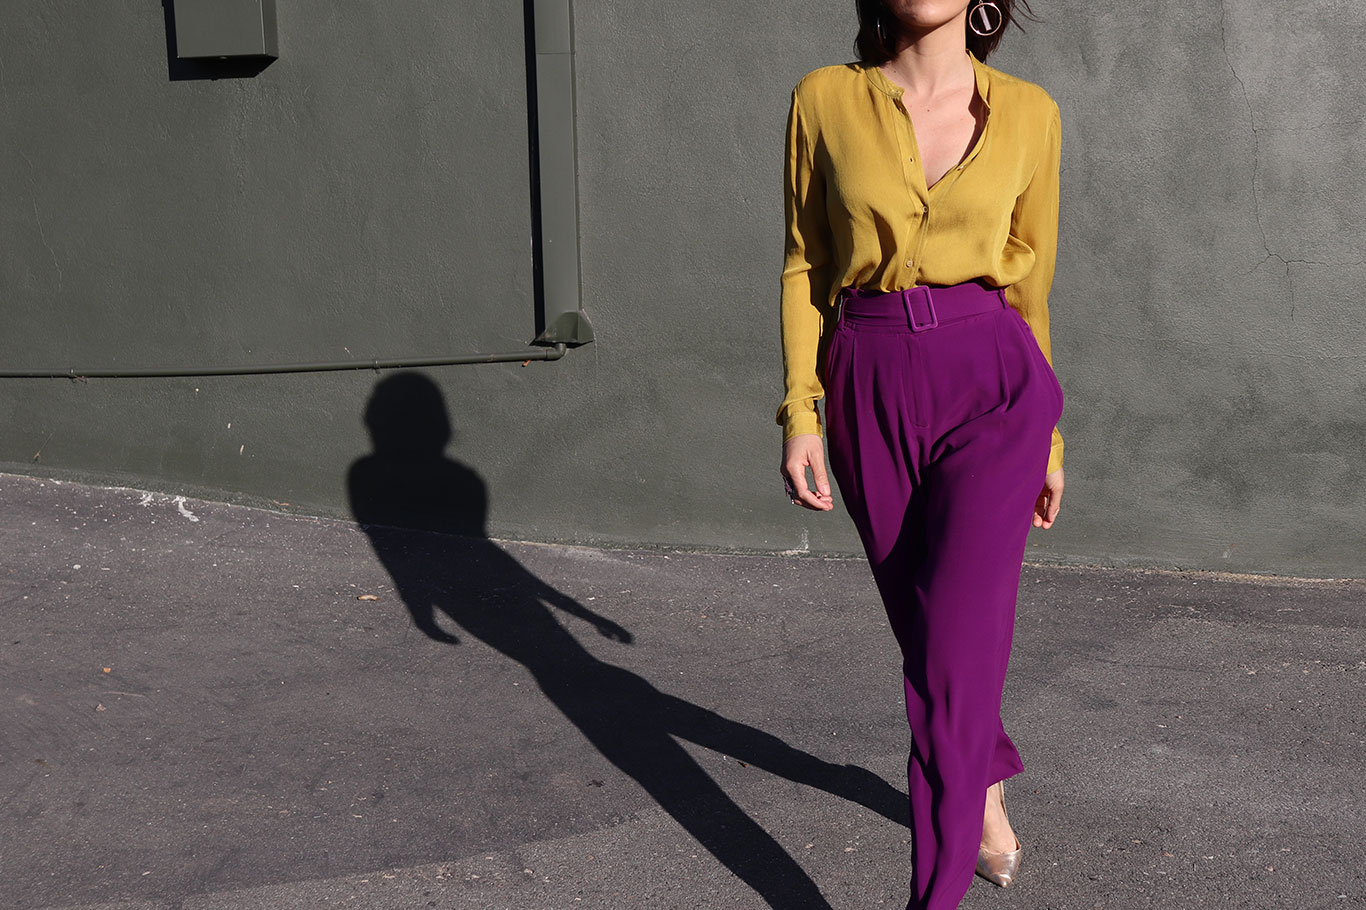 How to Style Purple Pants1 of 4 ways - My Stylosophy